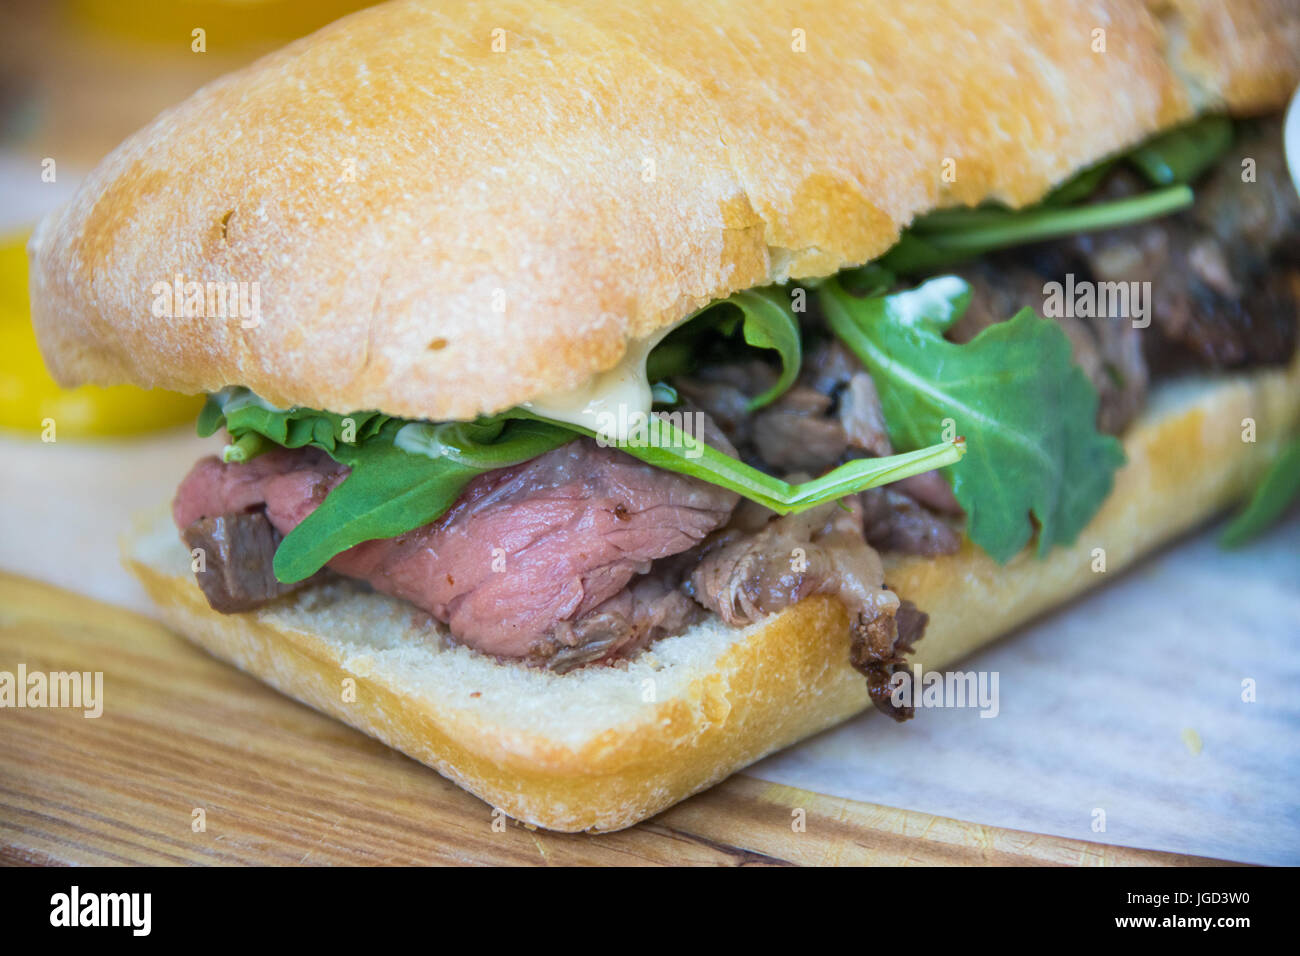 Prime rib, arugula, and garlic mayo sandwich at Meat and Bread Restaurant, Gastown, Vancouver, Canada Stock Photo